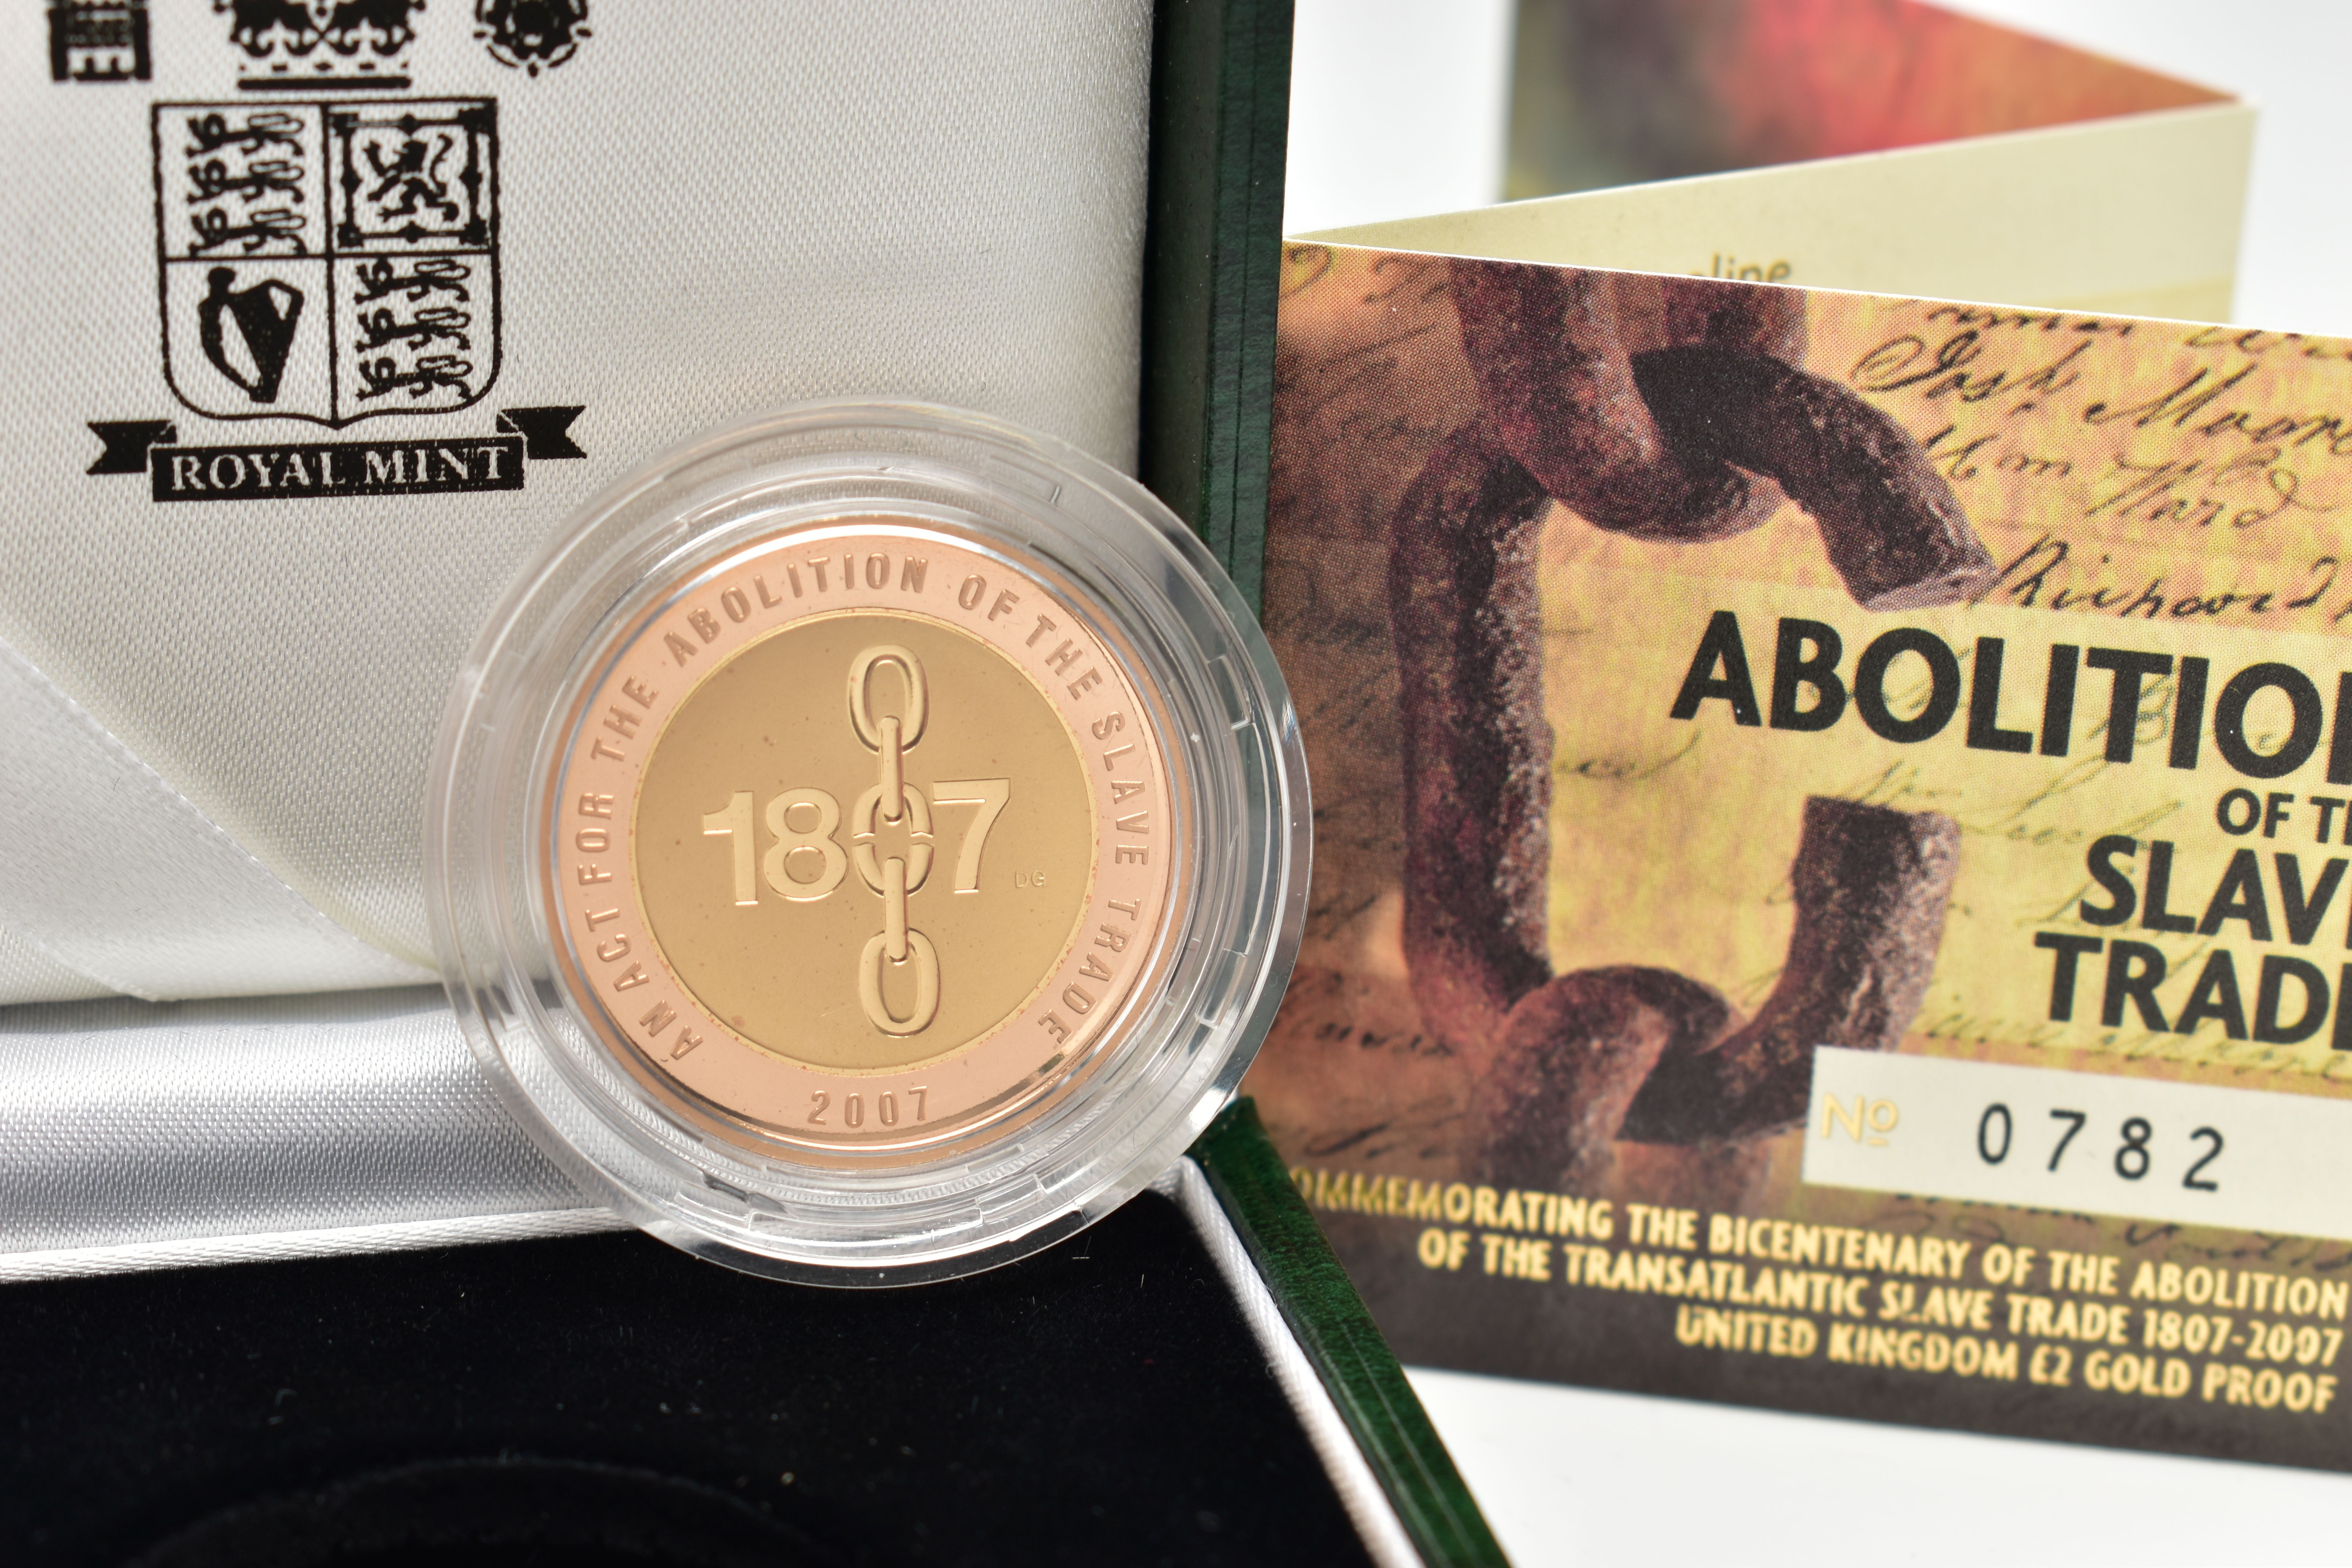 A ROYAL MINT 2007 GOLD PROOF ABOLITION OF THE SLAVE TRADE TWO POUND COIN, with red and yellow gold